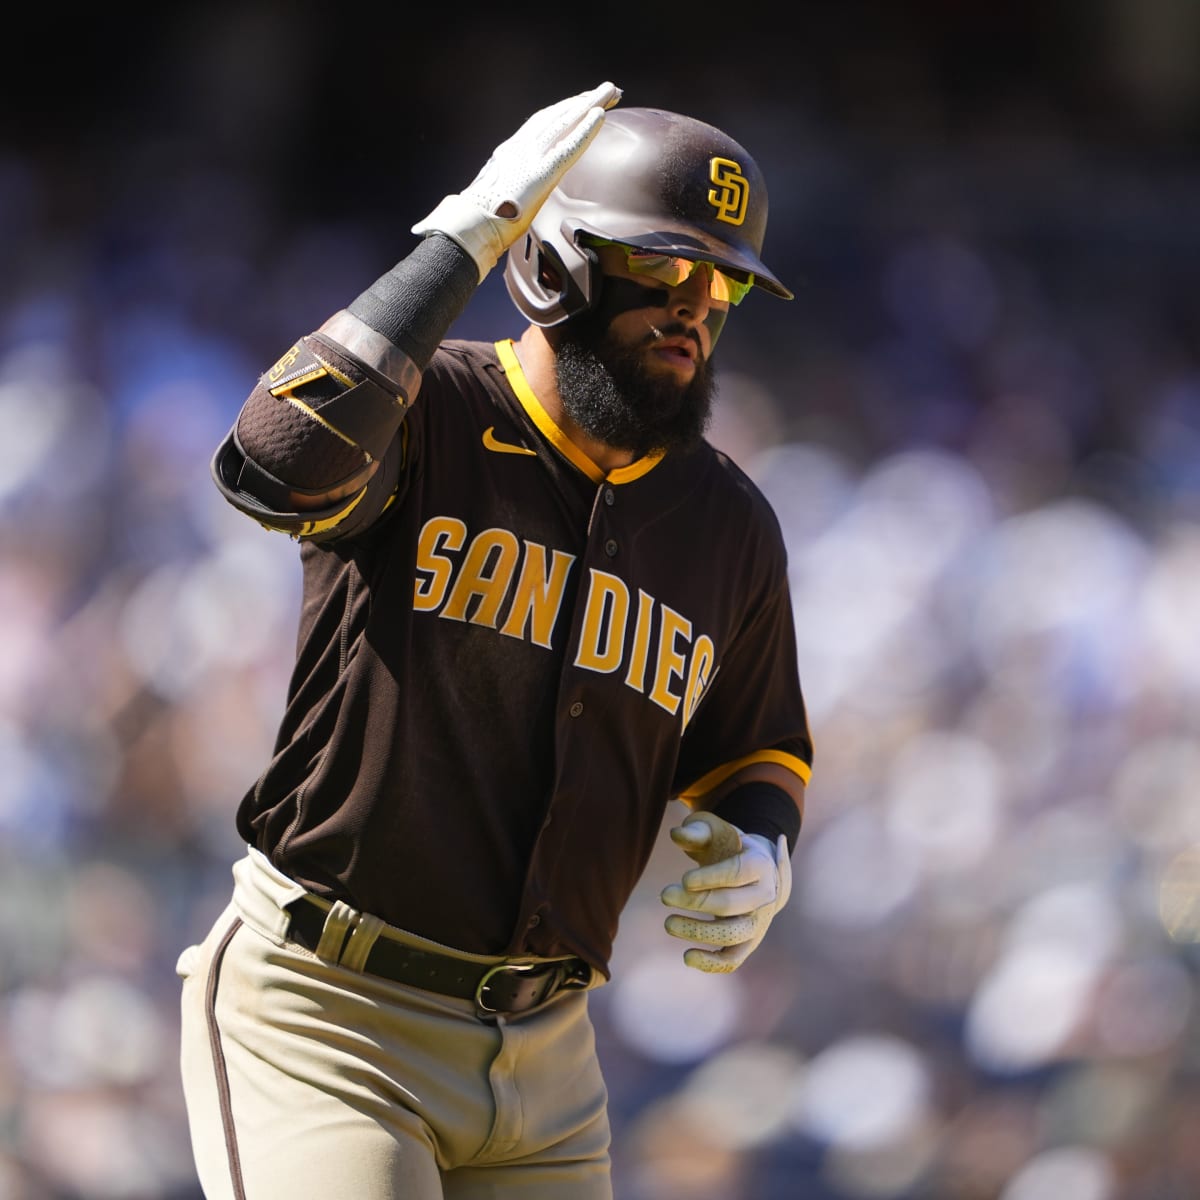 Padres' left fielder Soto scratched late vs. Yankees with back